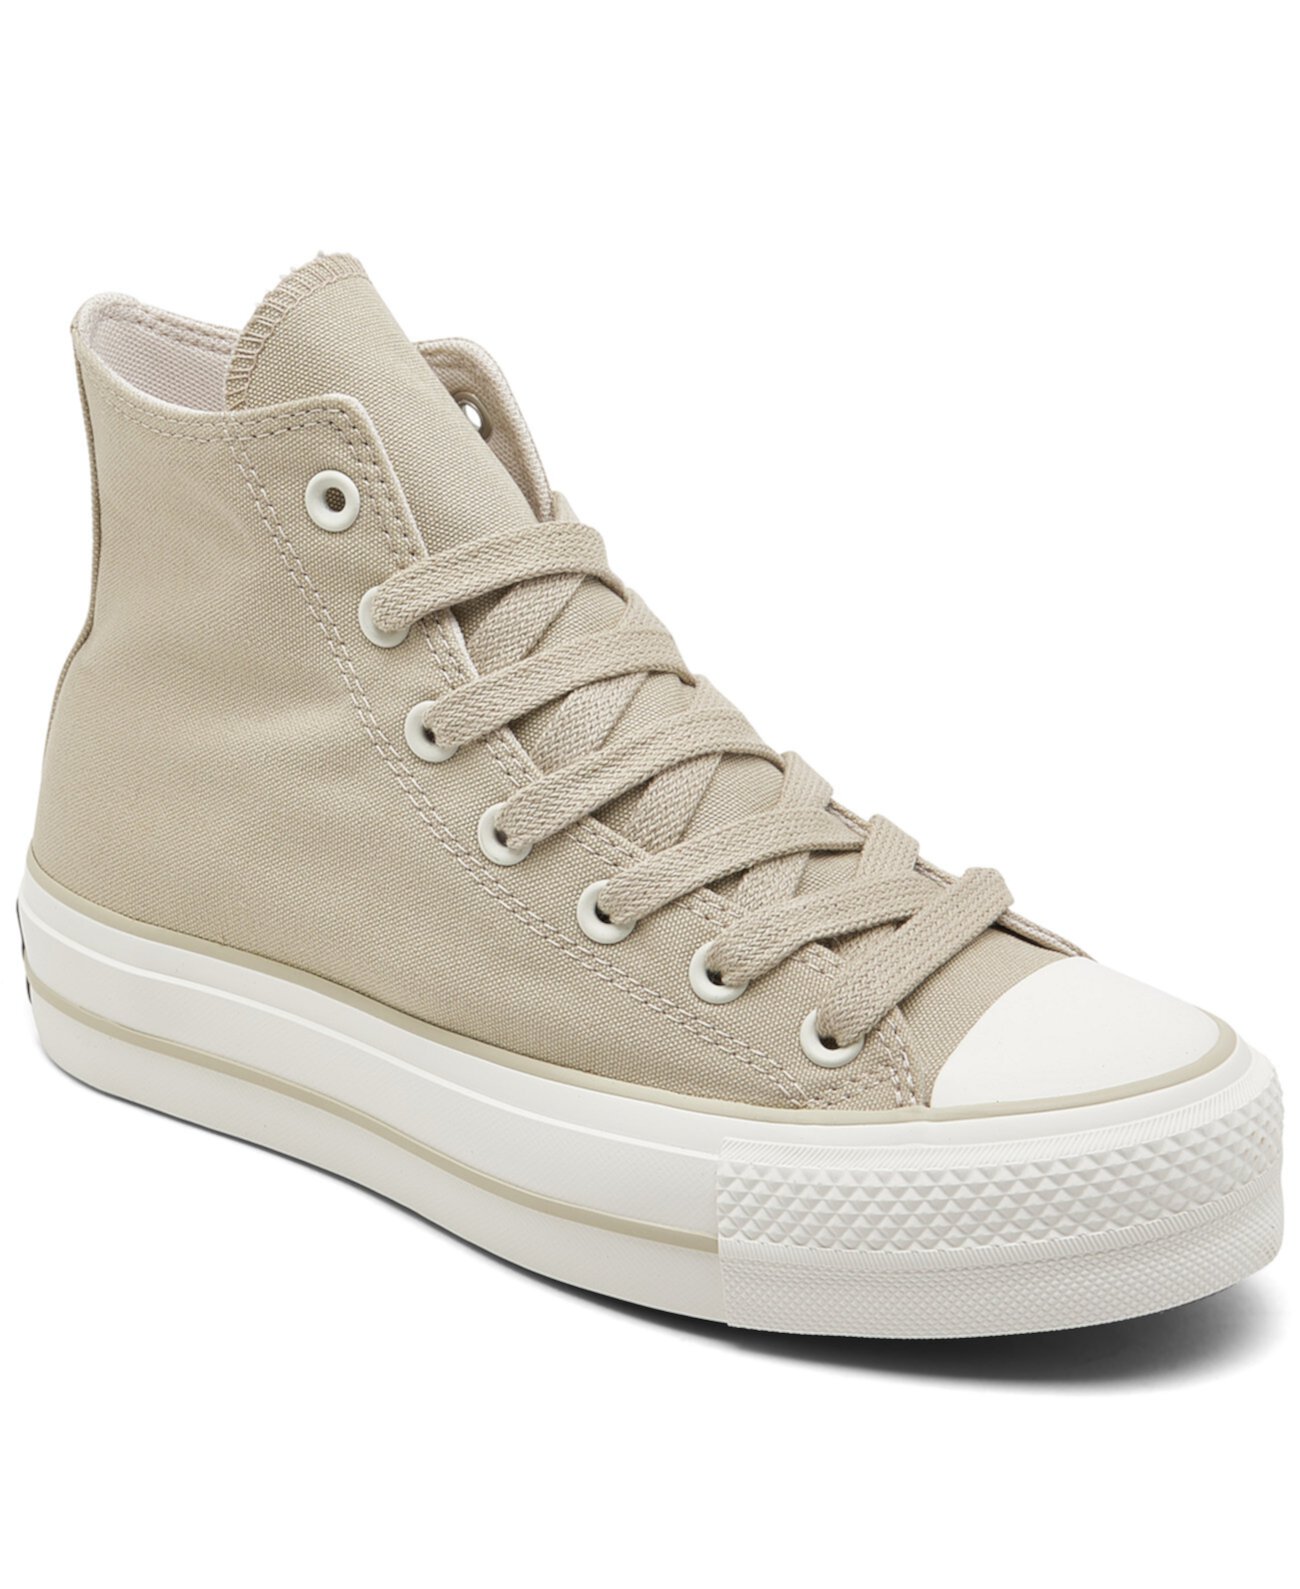 Women’s Chuck Taylor All Star Lift Platform Canvas Casual Sneakers from Finish Line Converse